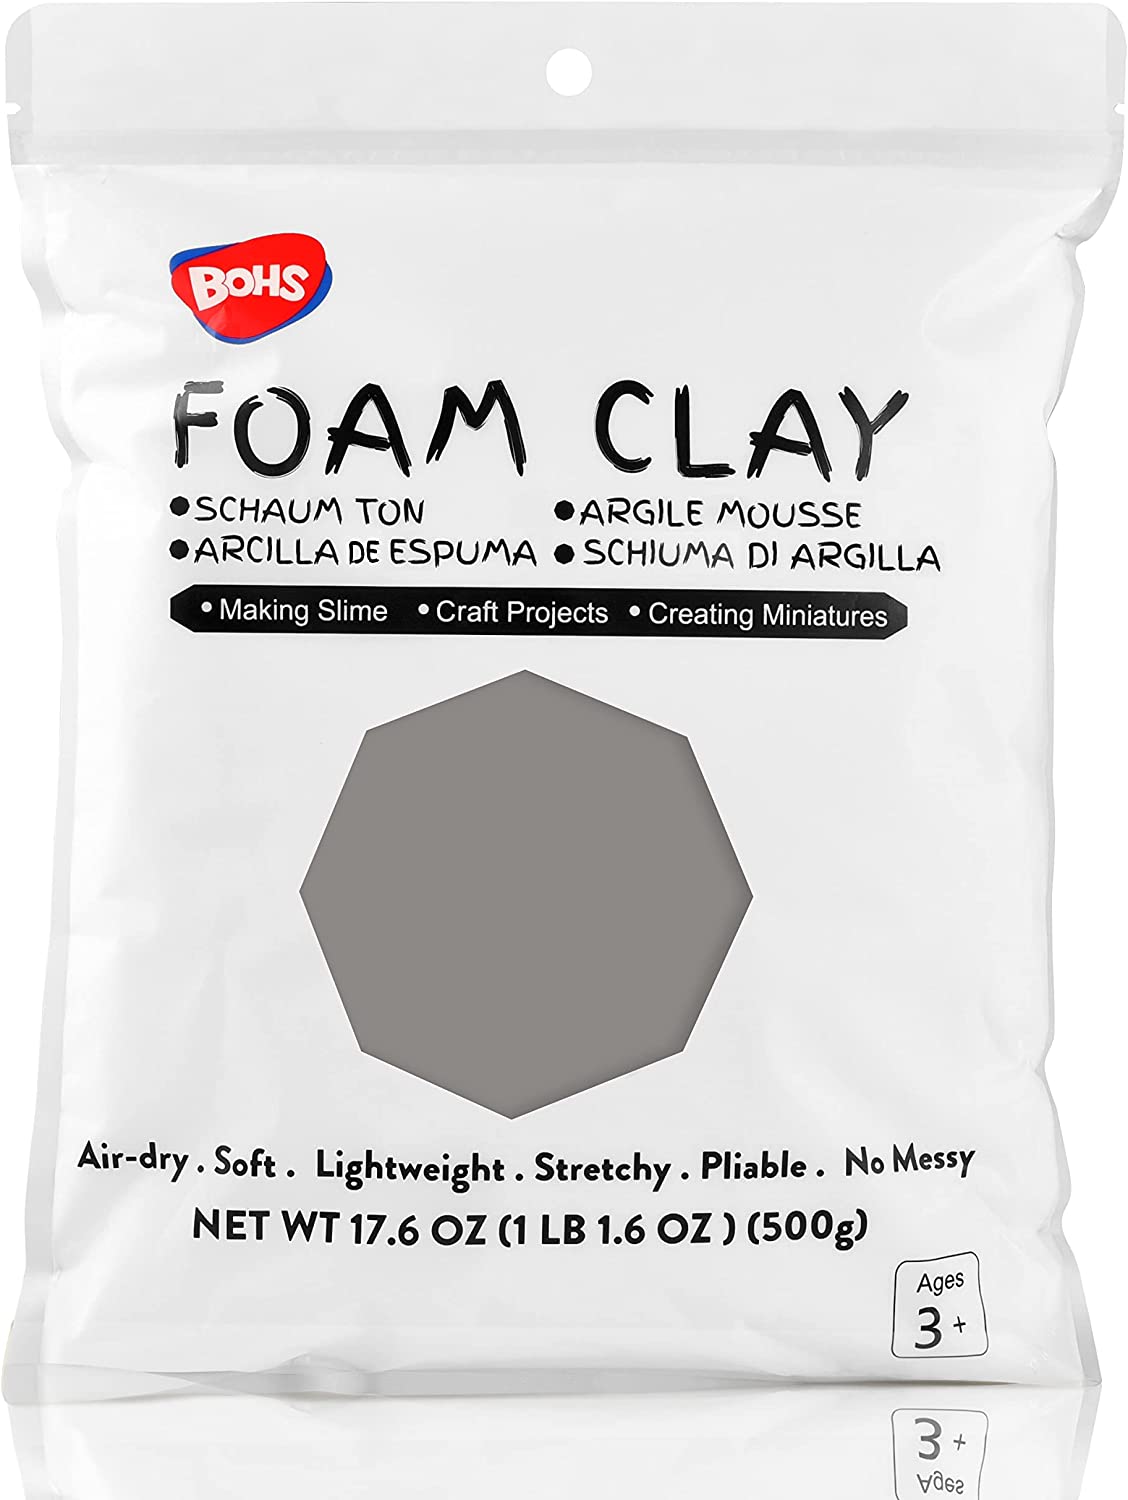 Moldable Cosplay Foam Clay, High Density Moldable Foam